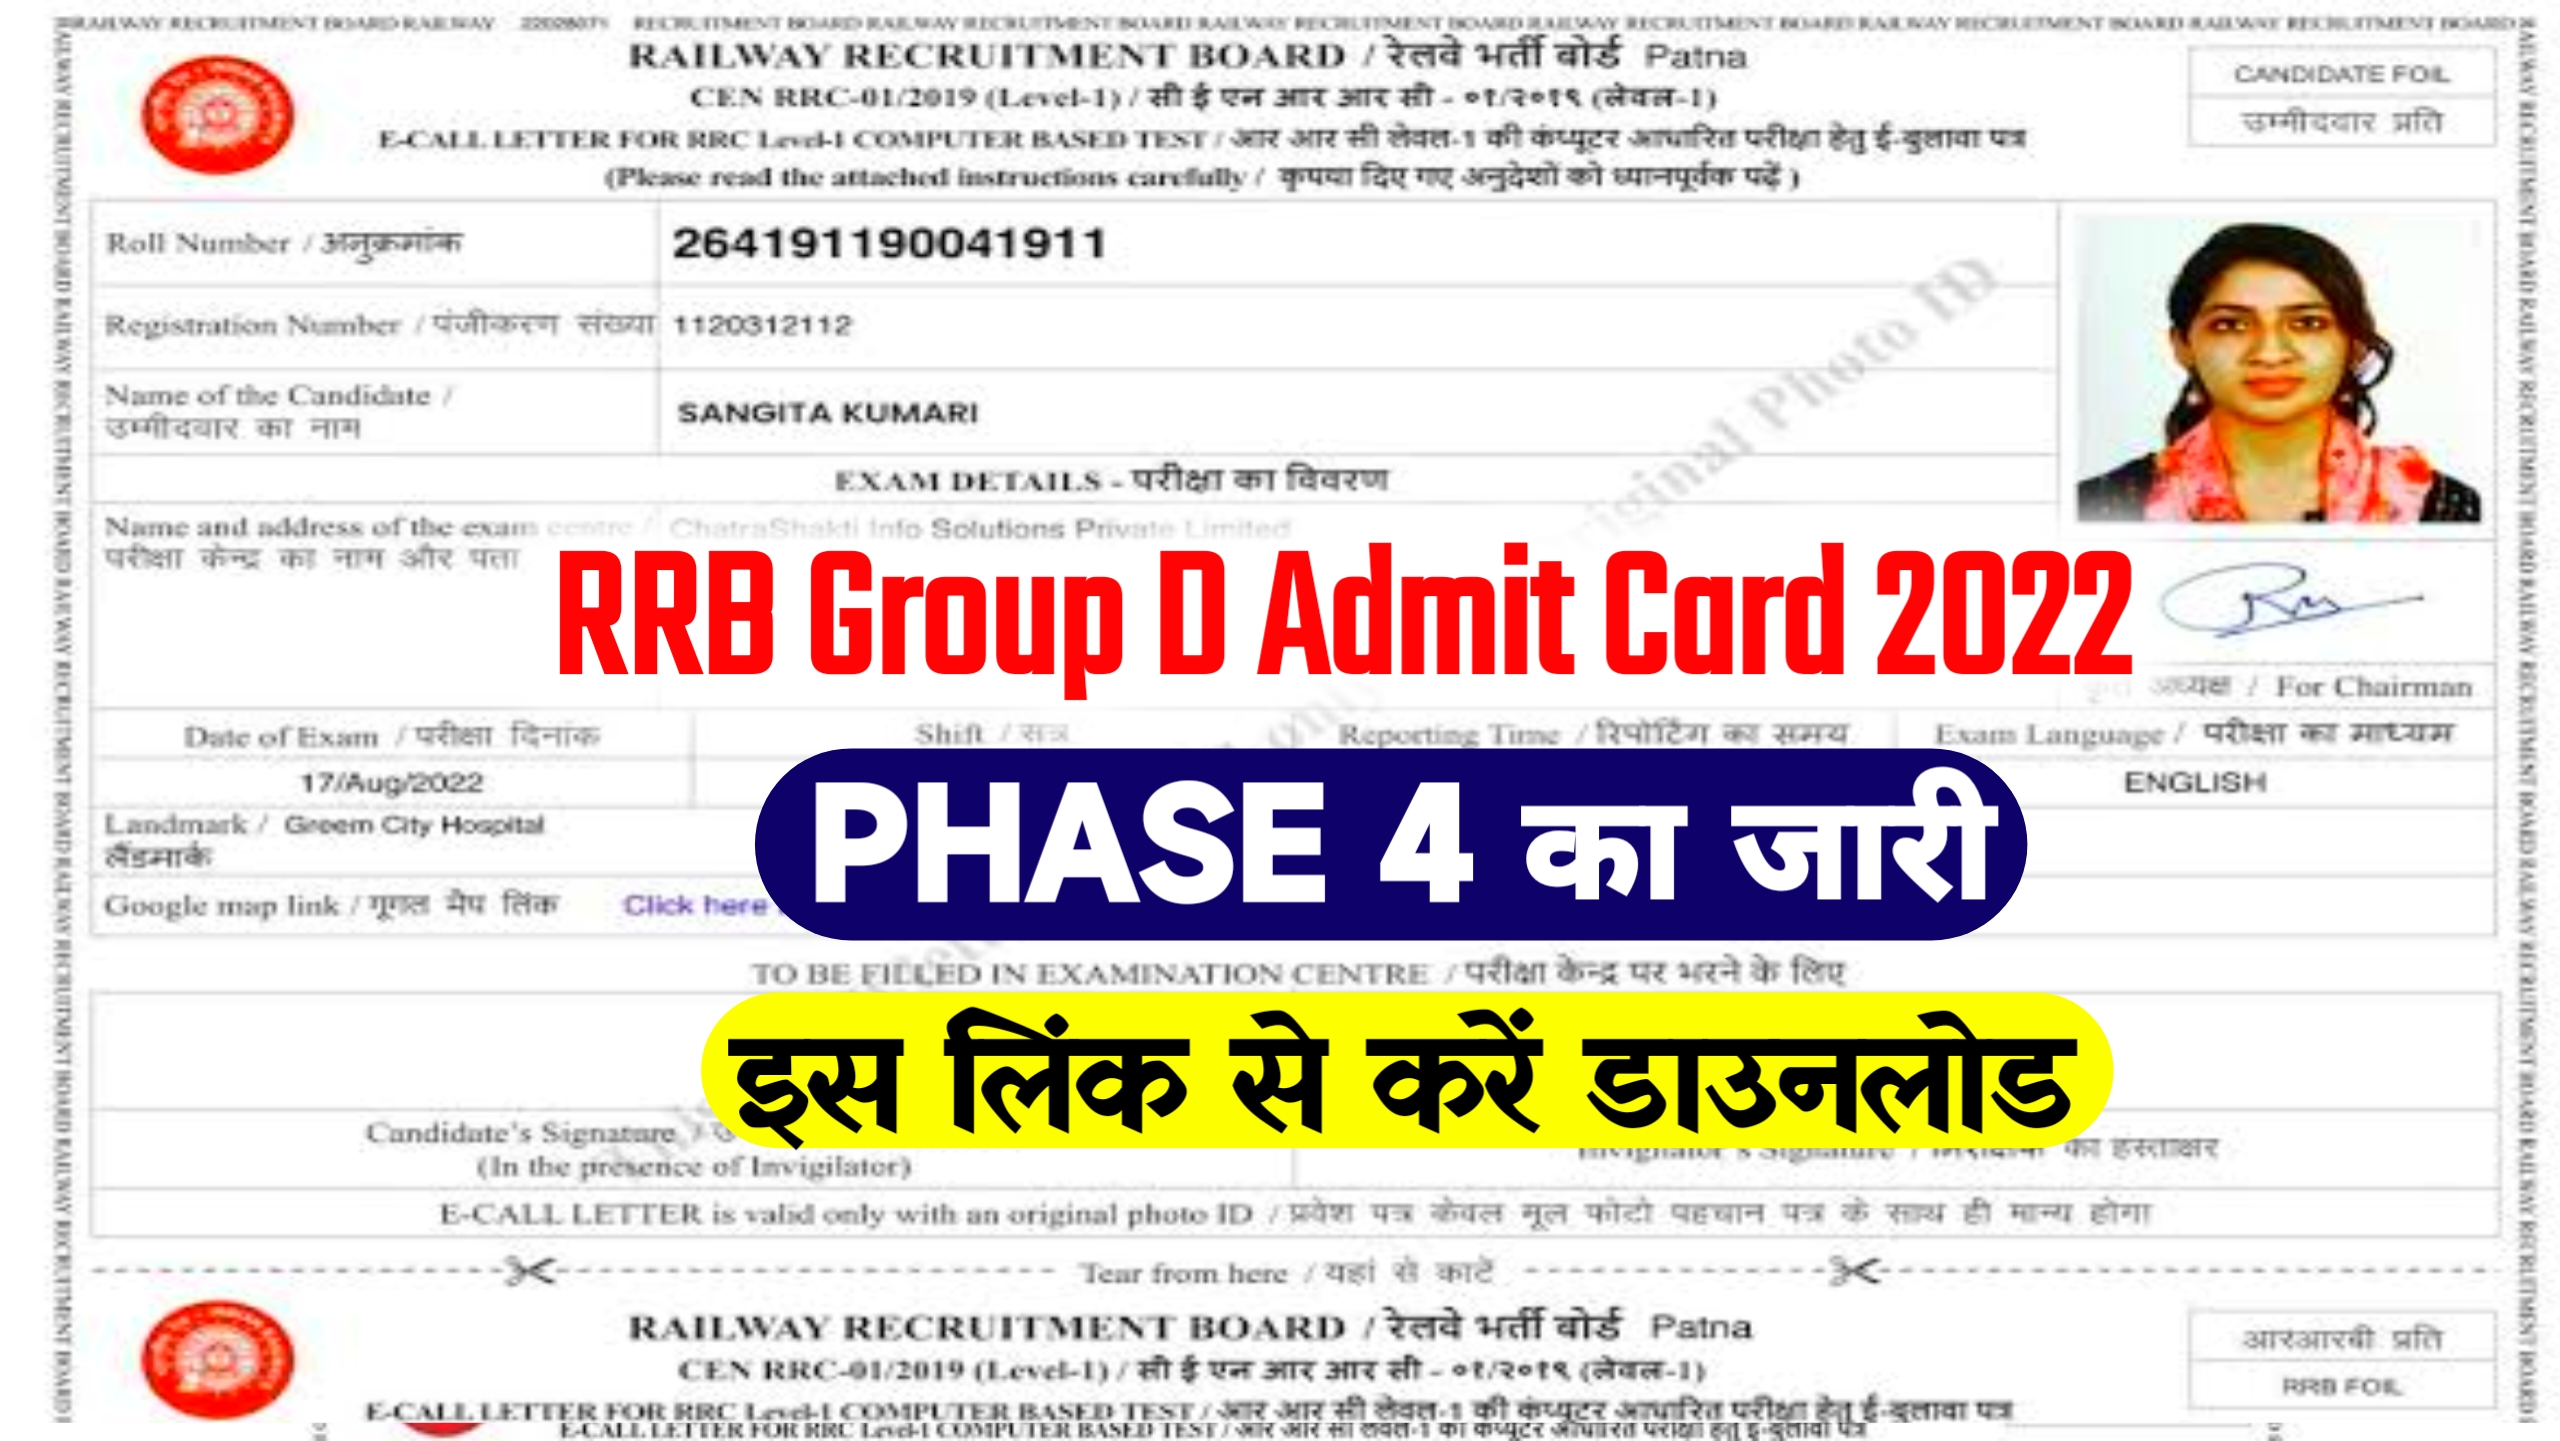 Railway Group D Phase 4 Admit Card 2022 Download Link - @rrbcdg.gov.in